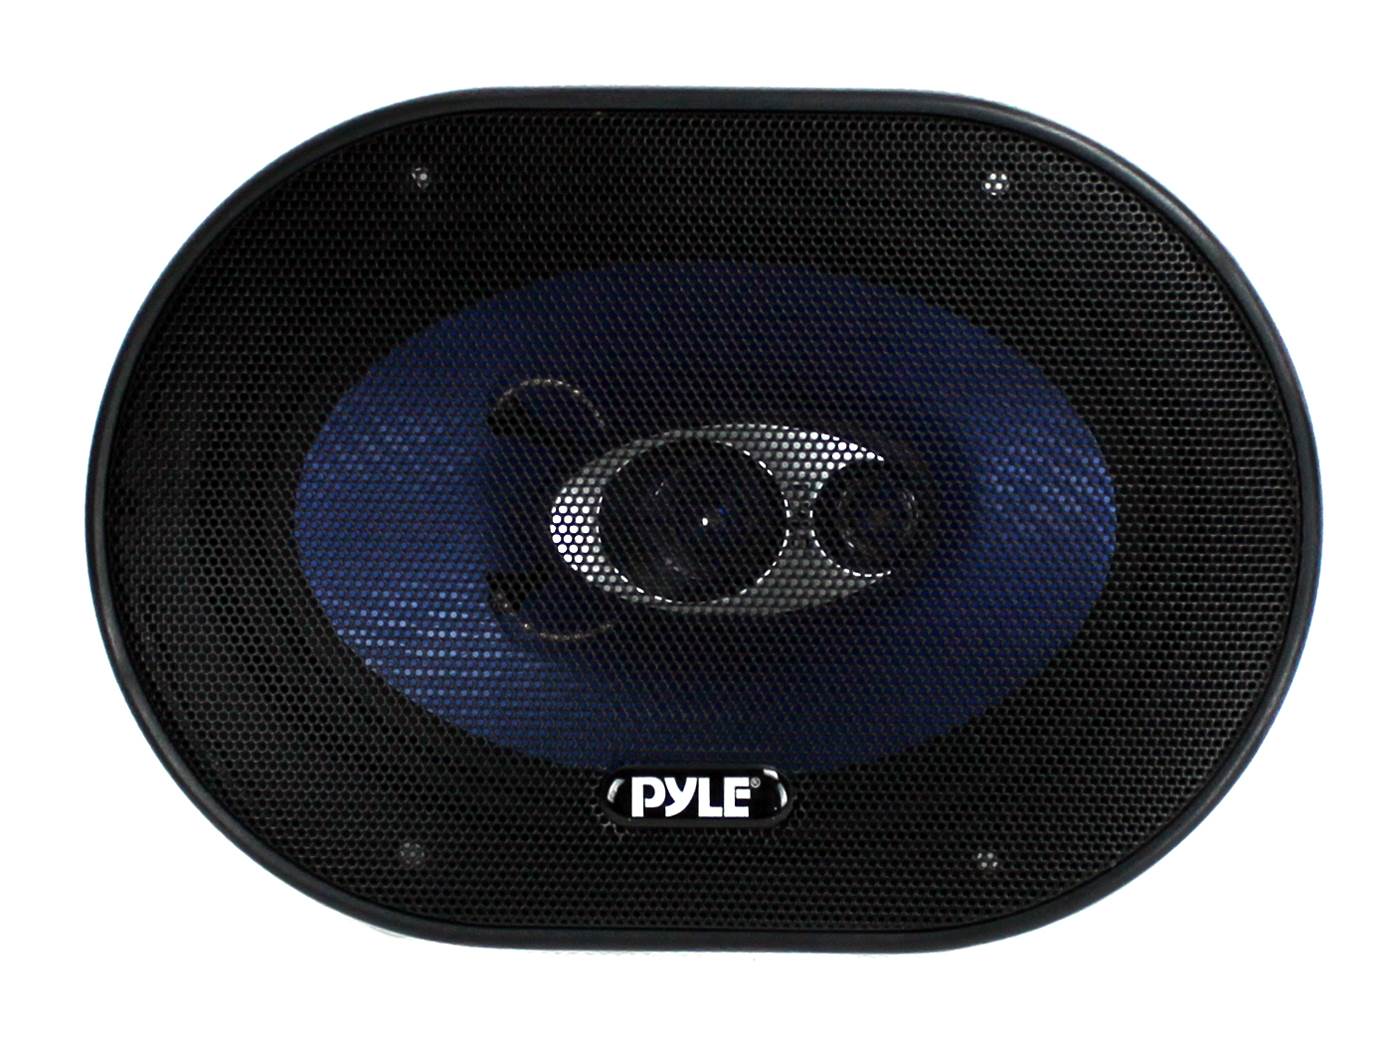 Pyle PL683BL 6x8" 720 Watt 3-Way Car Coaxial Audio Speakers Stereo - Blue - image 4 of 8